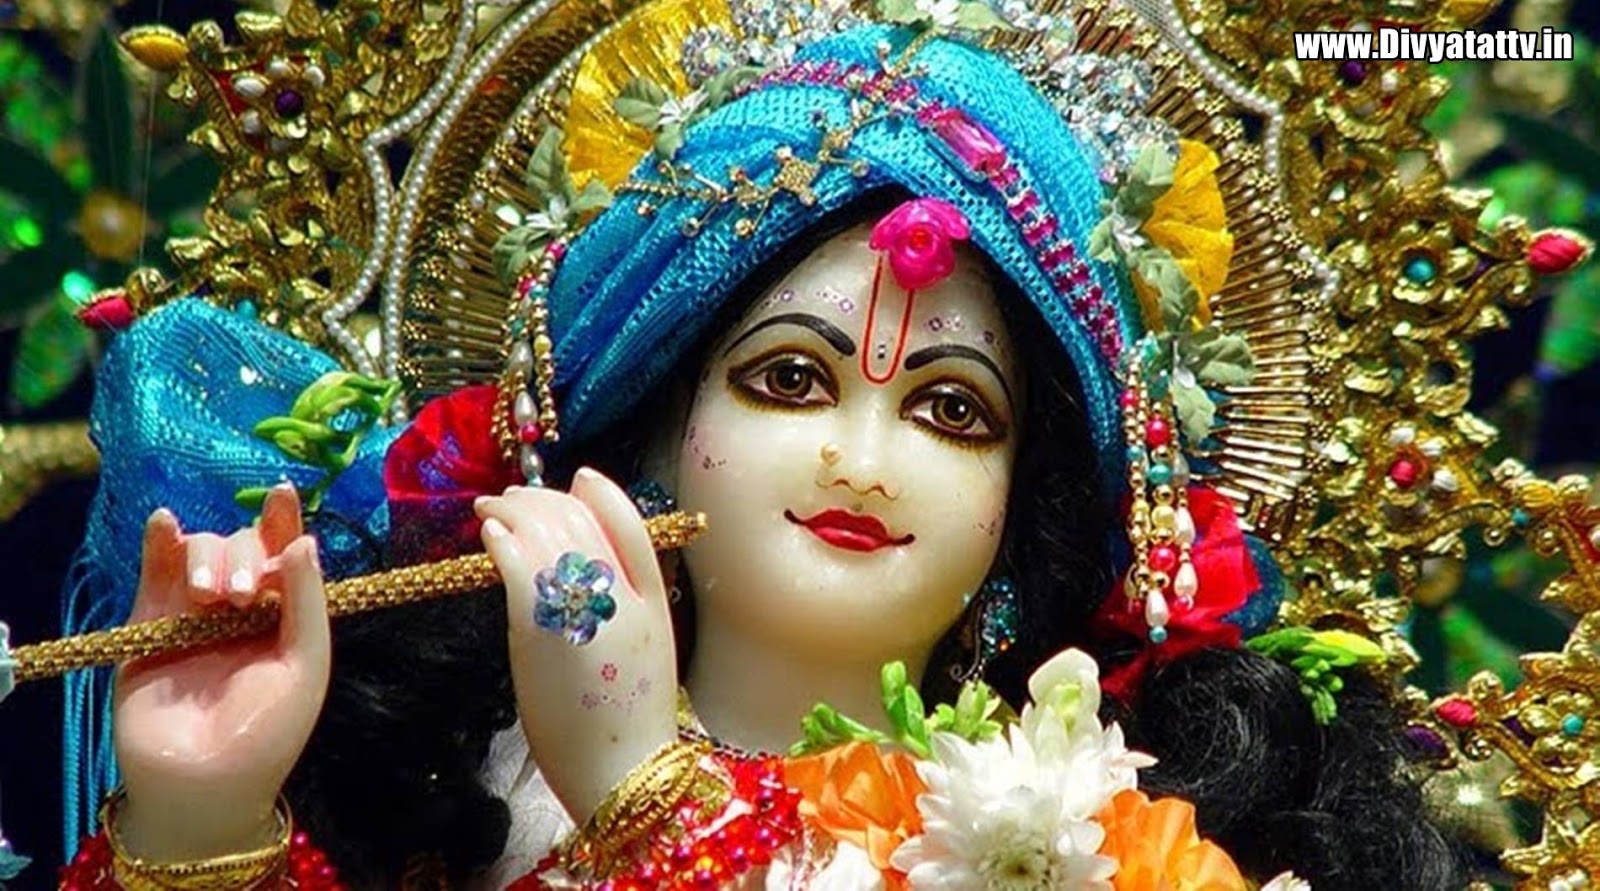 Divyatattva Astrology Free Horoscopes Psychic Tarot Yoga Tantra Occult Images Videos Beautiful Lord Krishna Hd Wallpapers God Radha Krishna Images Photos Pictures Backgrounds For Free Download At Divyatattva In